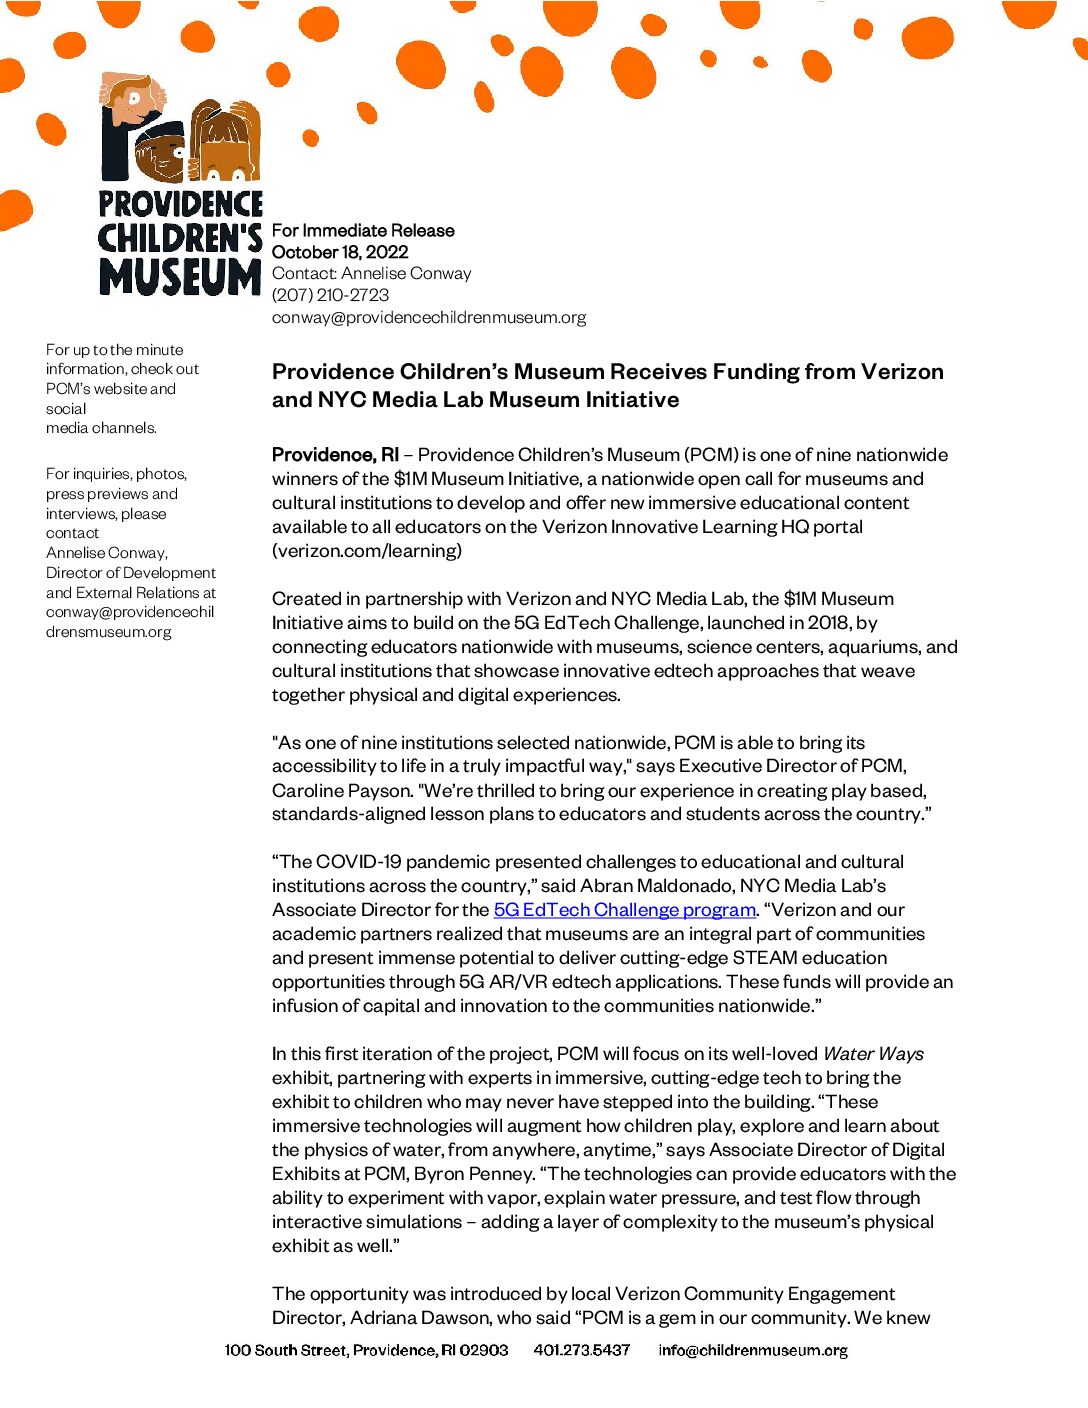 Providence Children’s Museum Receives Funding from Verizon and NYC Media Lab Museum Initiative